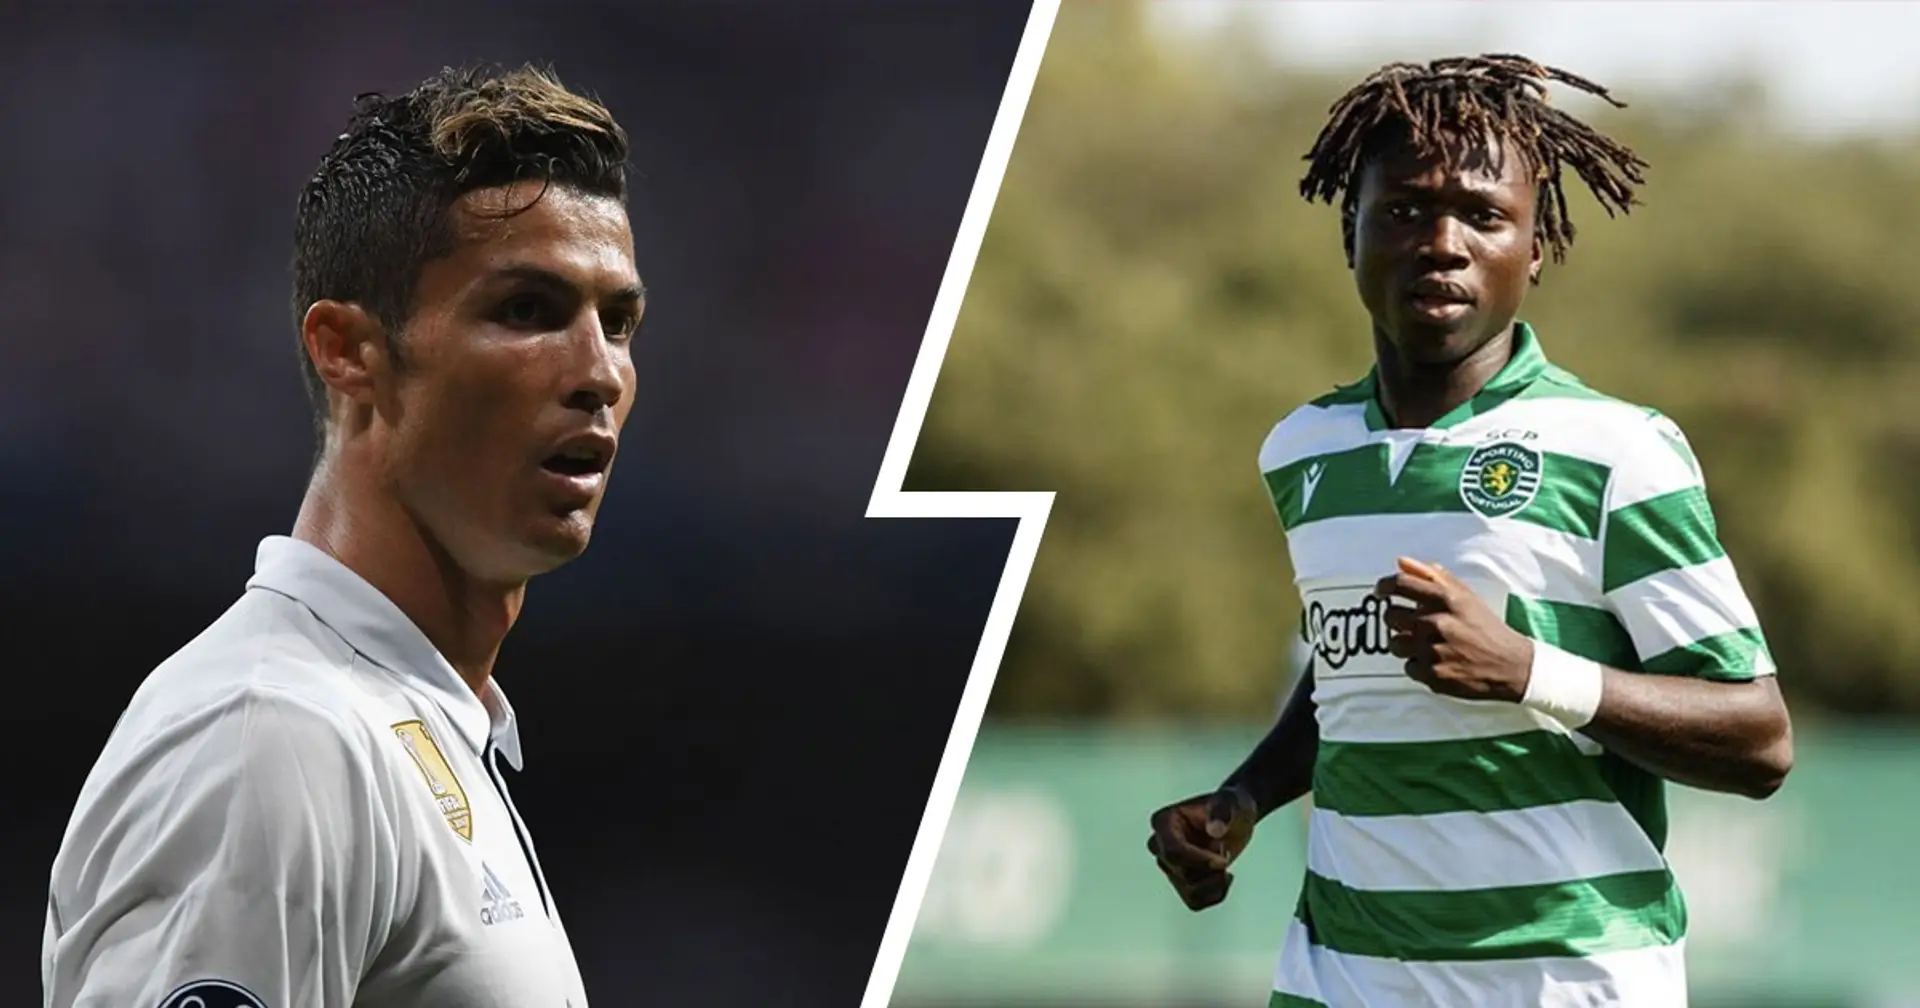 17-year-old beats Cristiano Ronaldo's record with Sporting: Here are 5 Madrid records from Portuguese that are incredibly hard to top